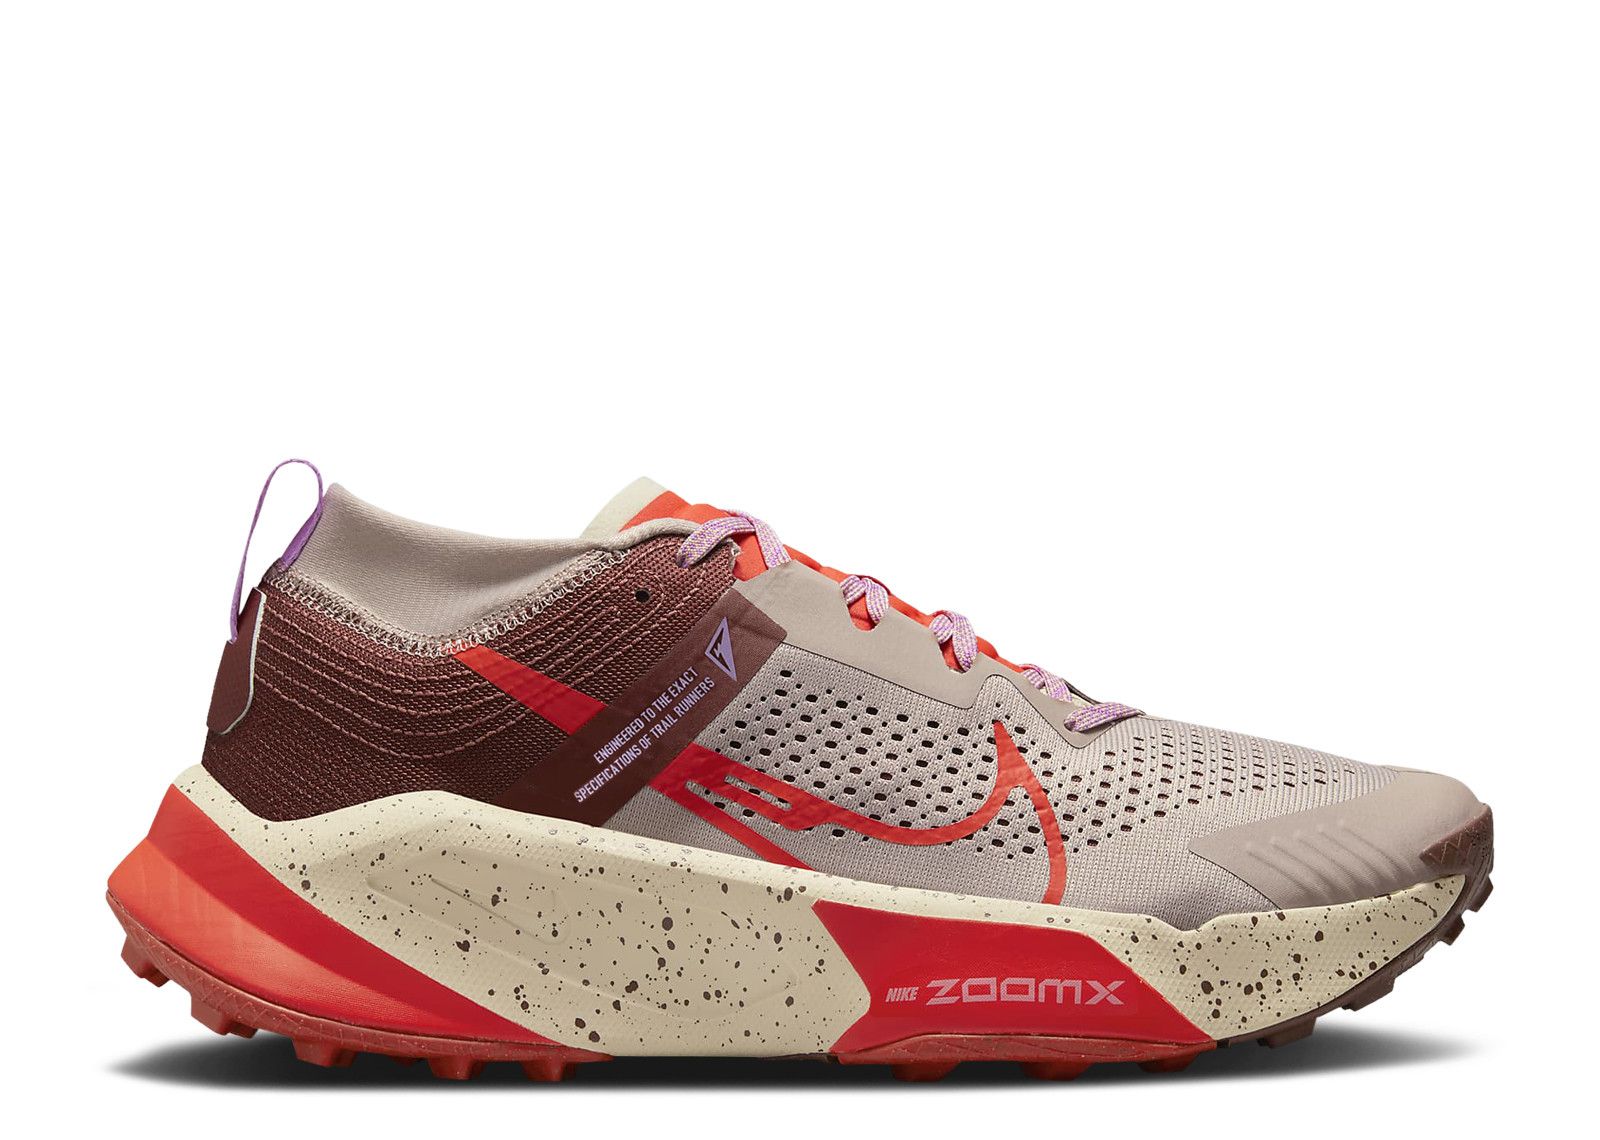 ZoomX Zegama 'Diffused Taupe Picante Red' - Nike - DH0623 200 ...